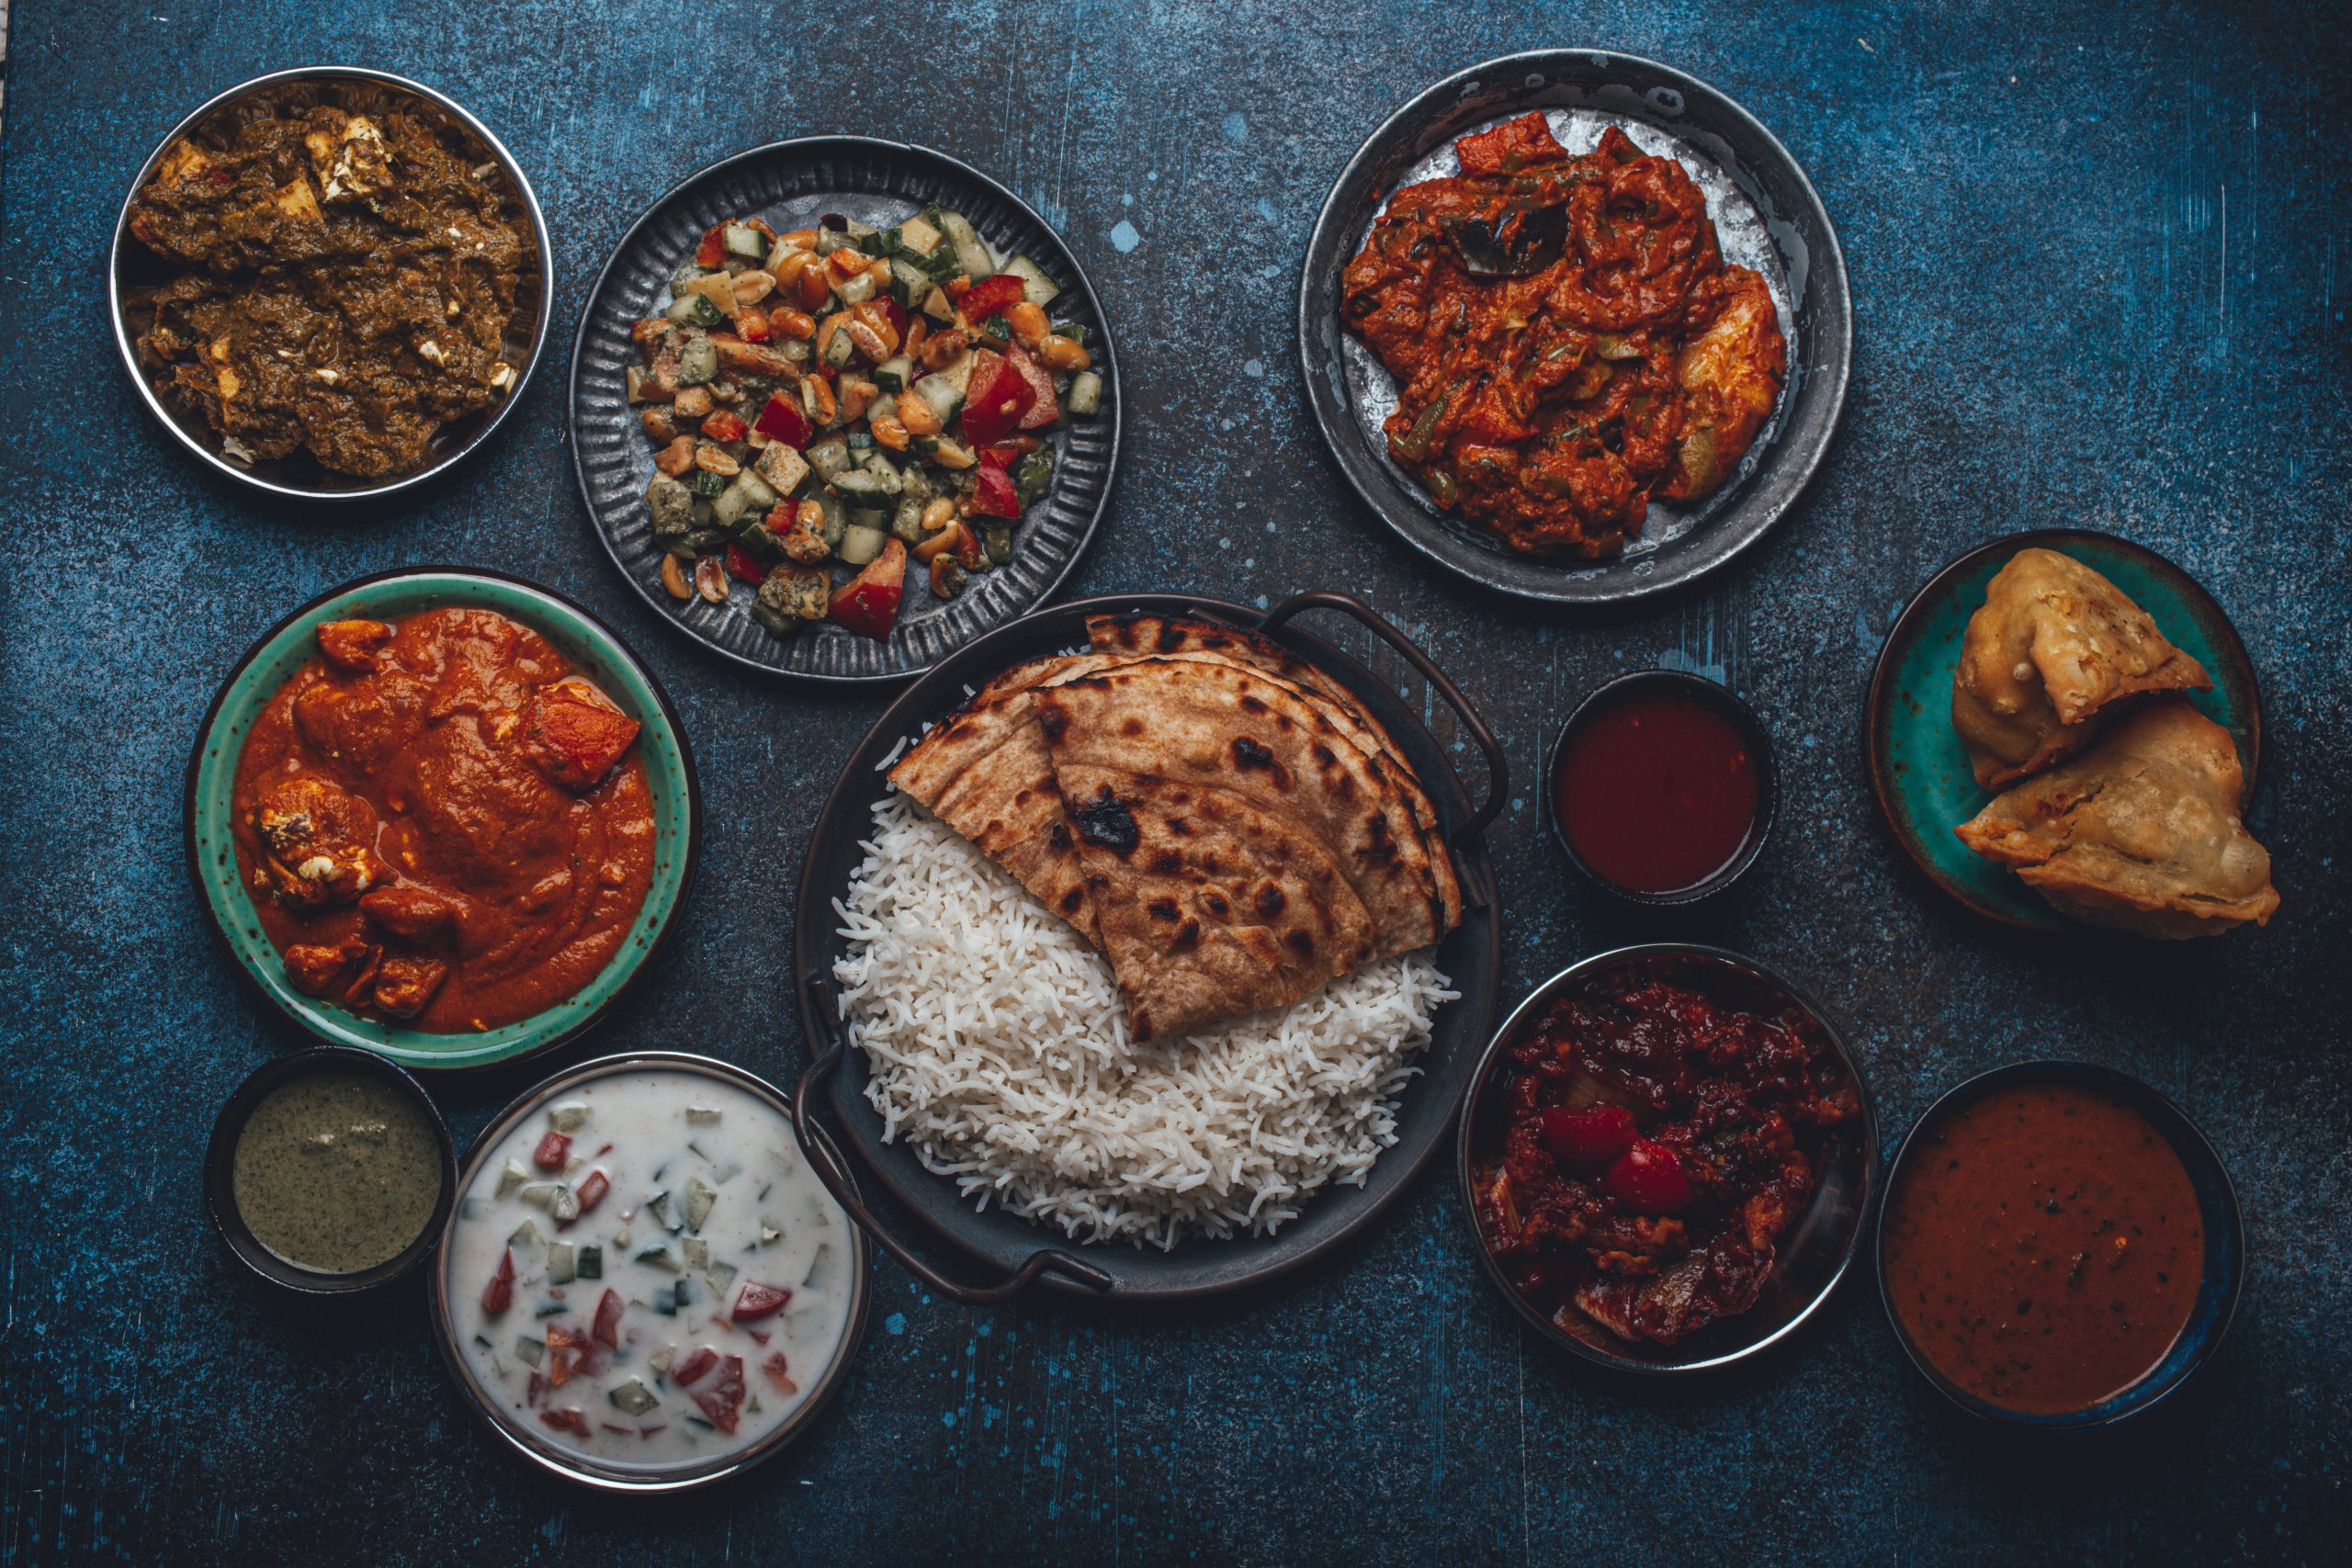 Assorted Indian ethnic food buffet on rustic concrete table from above: curry, fried samosa, rice biryani, dal, paneer, chapatti, naan, chicken tikka masala, traditional dishes of India for dinner. Ayurvedic Detox for Weight Loss concept